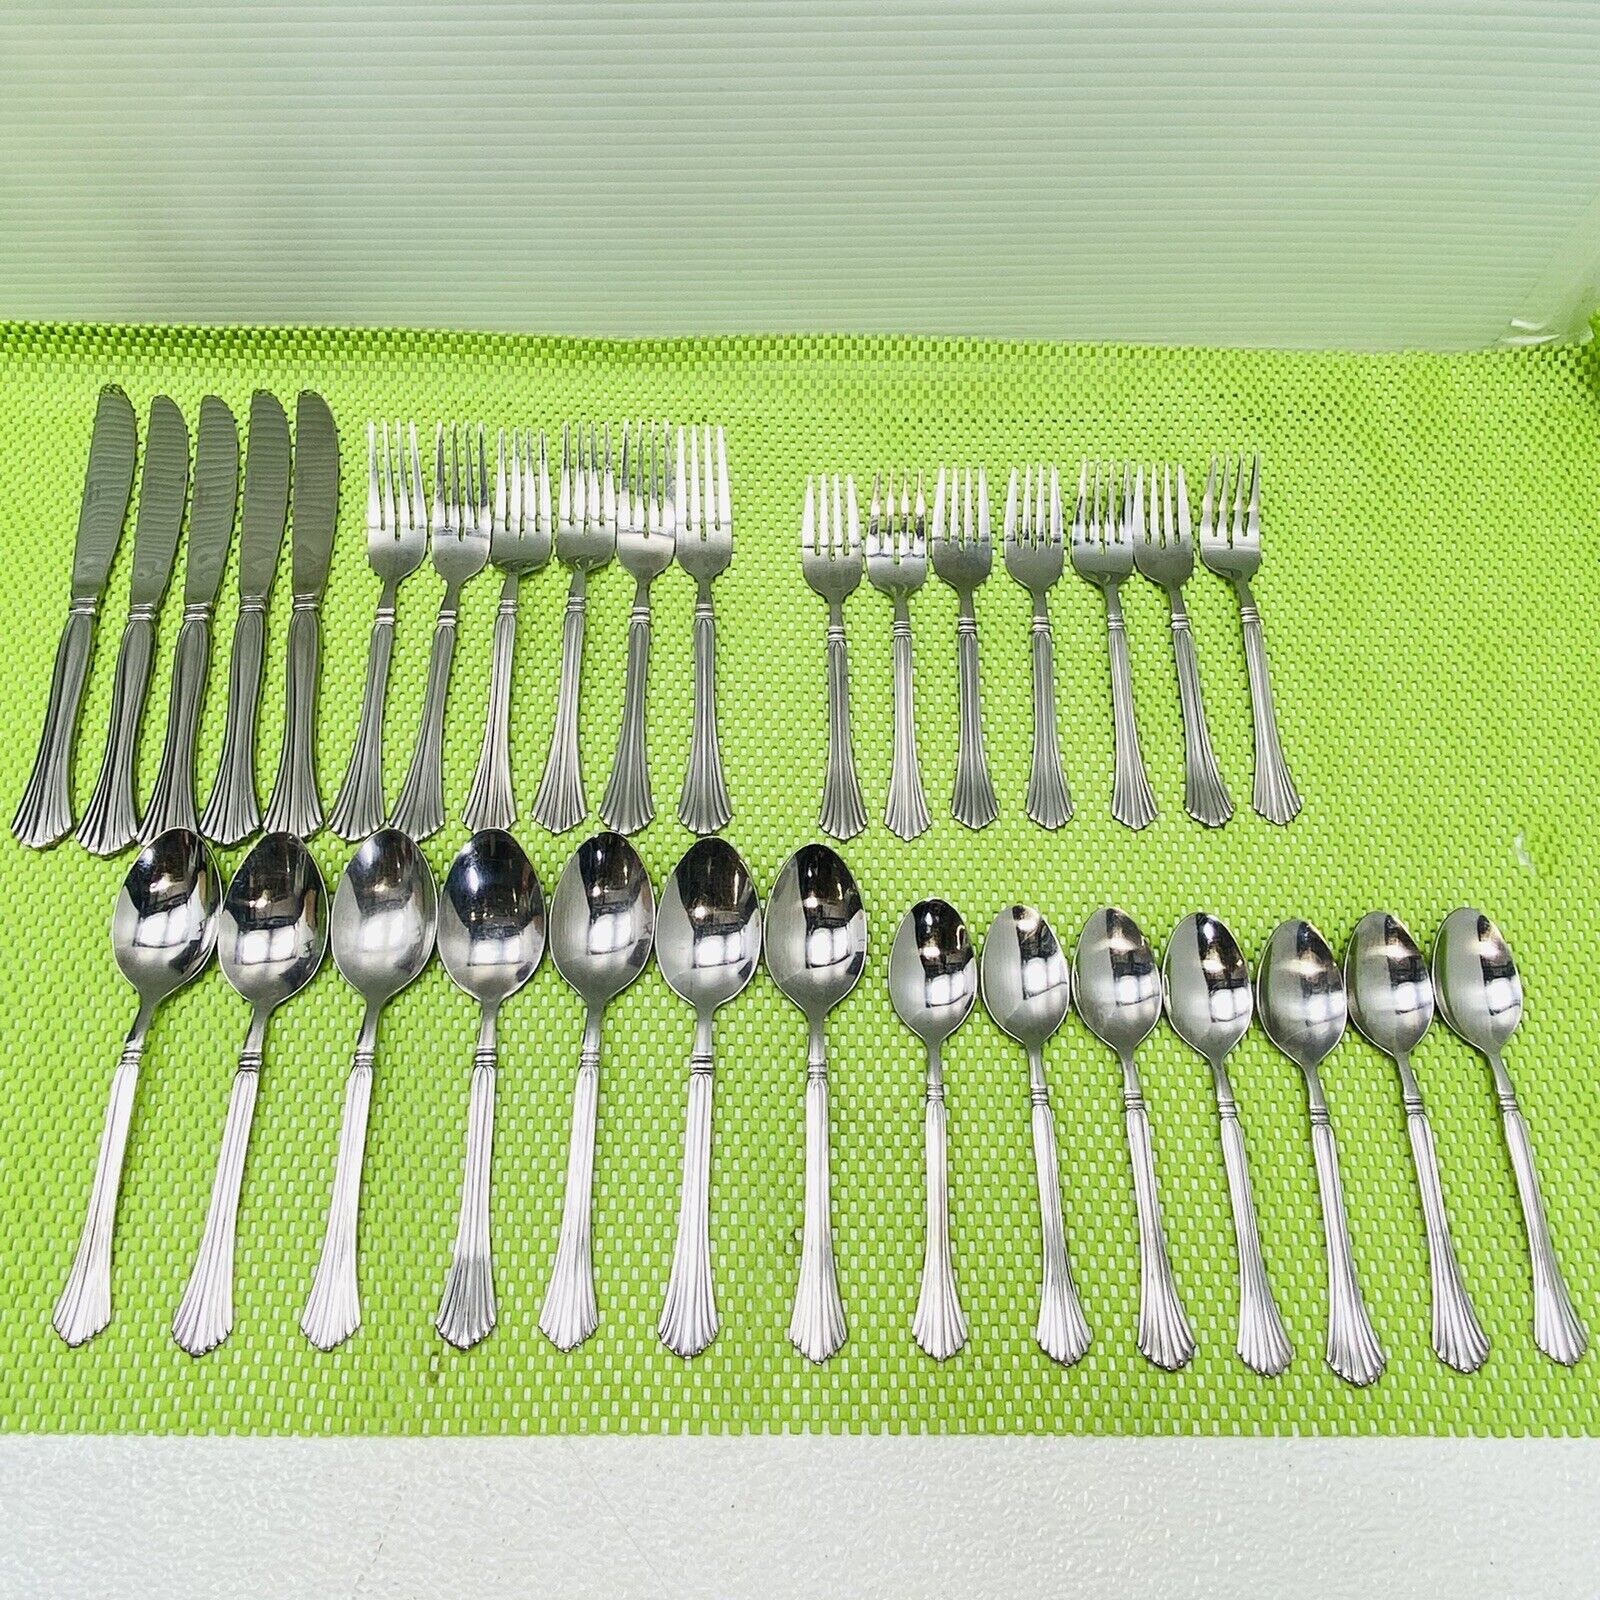 Pfaltzgraff  Stainless Perennials  Flatware Mixed set Knives Forks Spoons 32 pcs